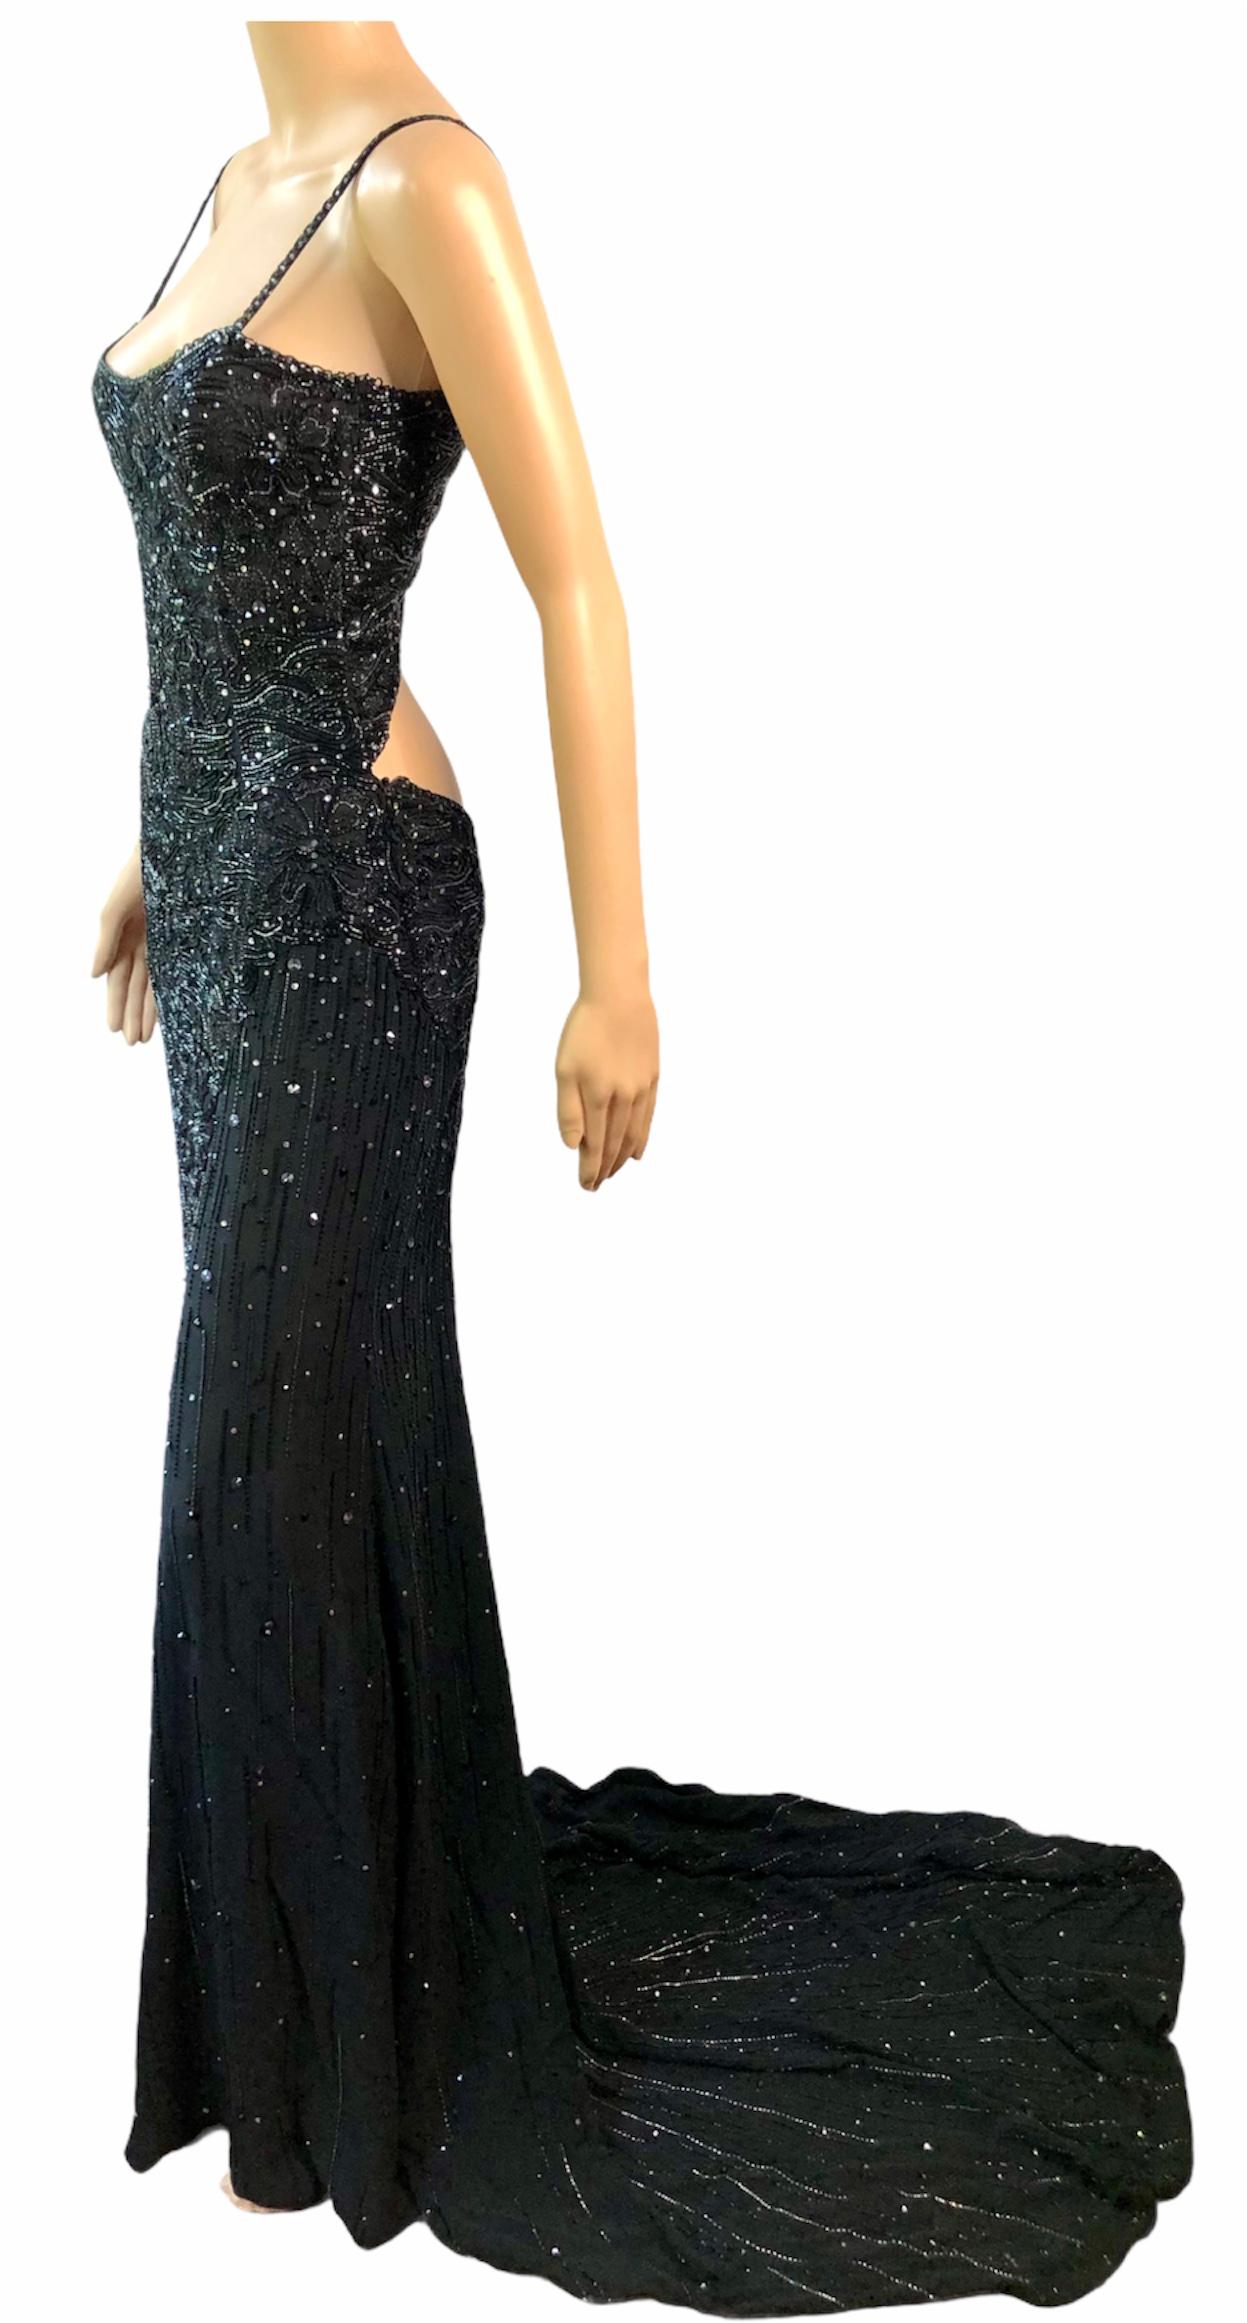 Atelier Versace Haute Couture F/W 1998 Swarovski Crystal Embellished Cutout Open Back Long Train Black Evening Dress Gown Size IT 42